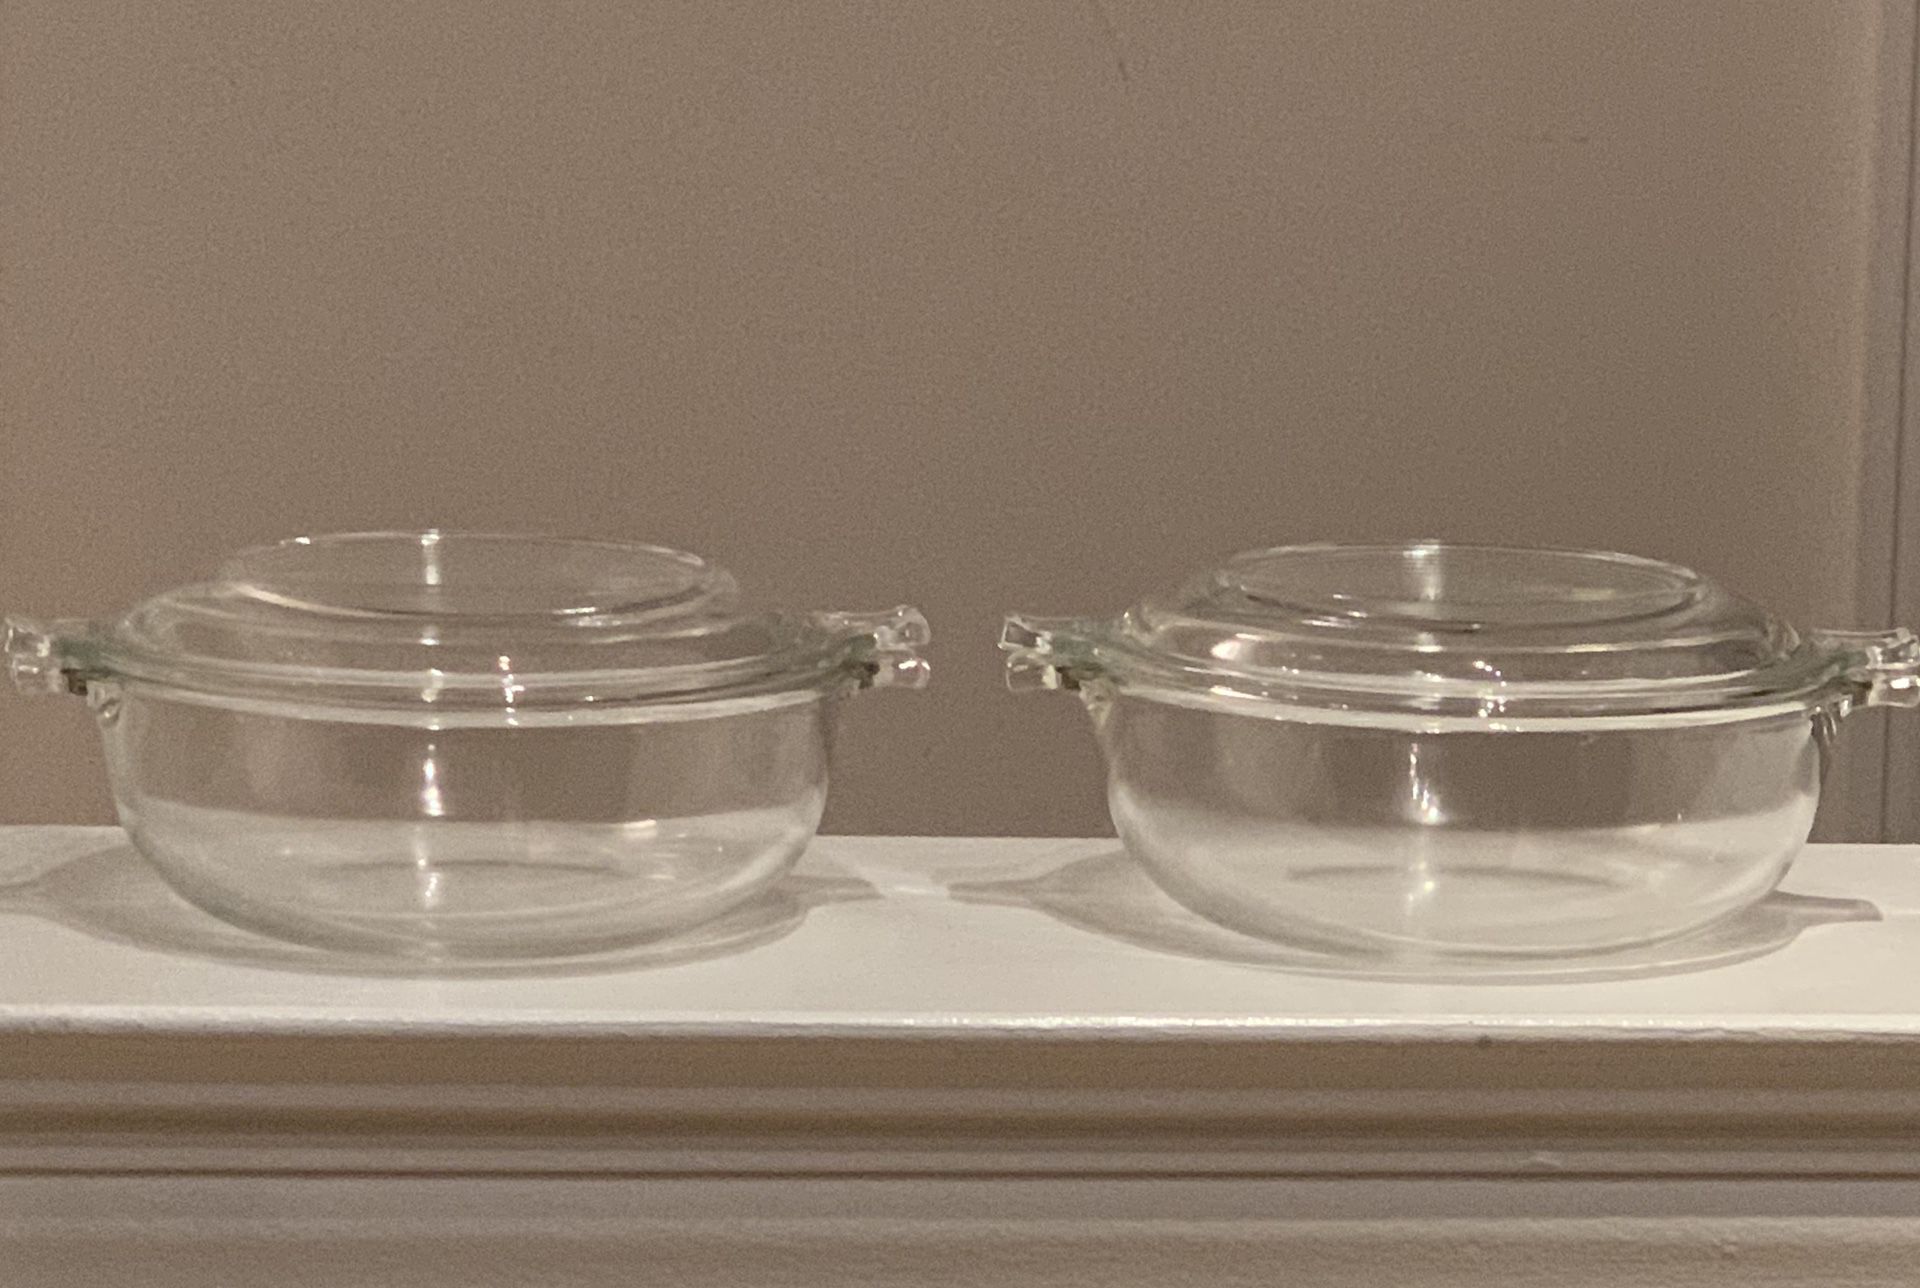 2 Pyrex Glass Bowls with Lids—5.5”